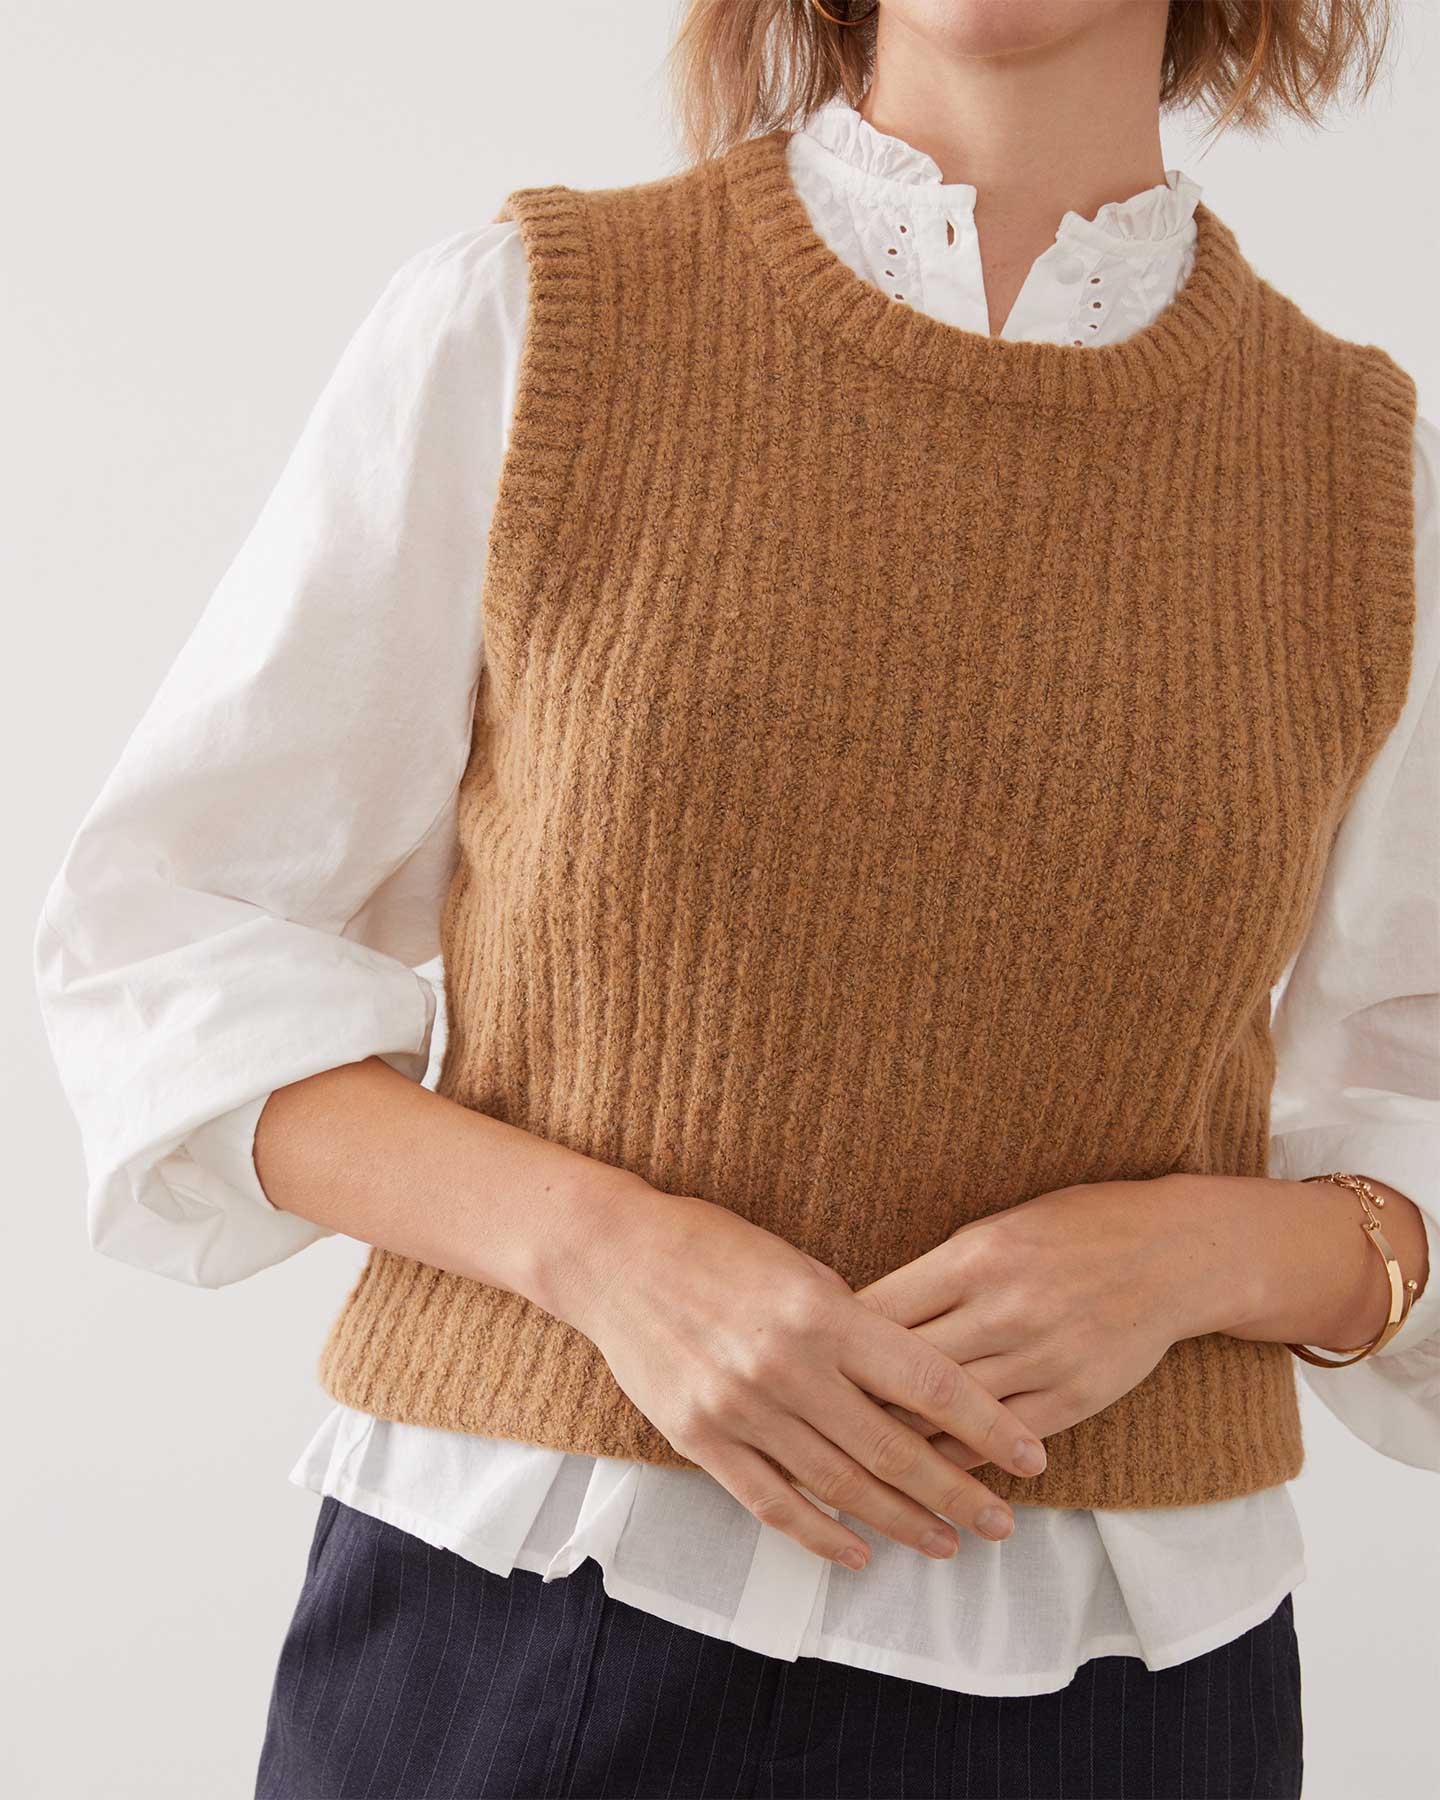 How to team up a knitted vest in 5 styles - Lookiero Blog